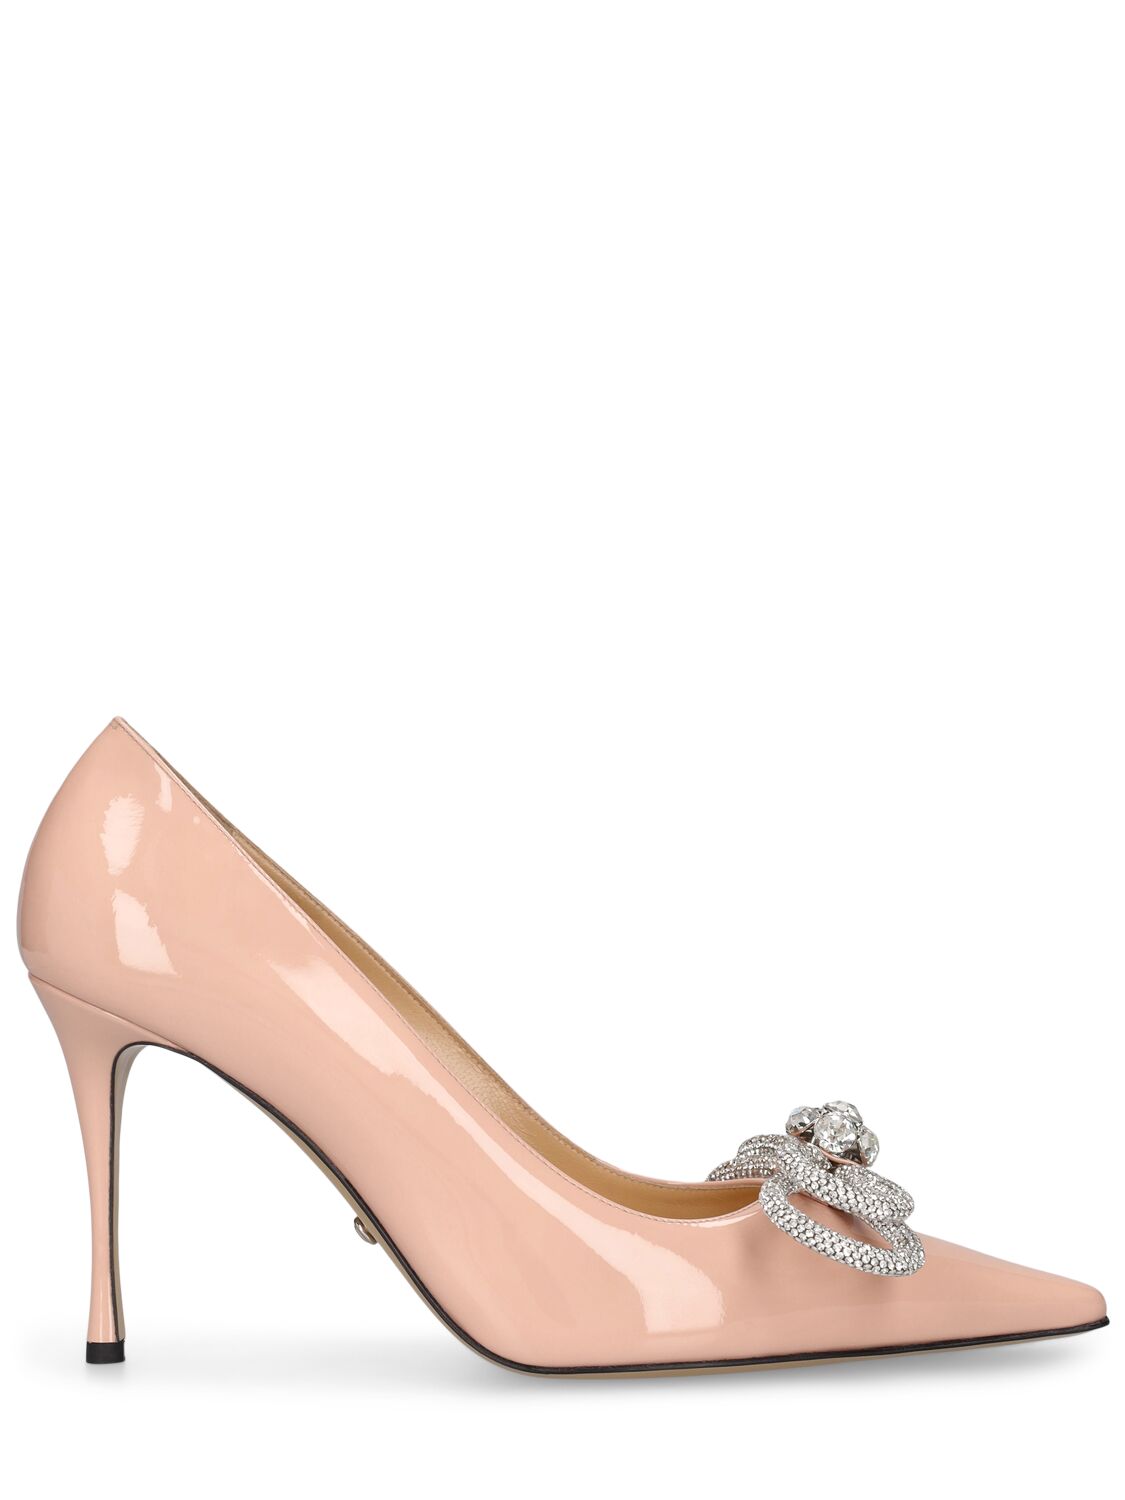 Shop Mach & Mach 95mm Double Bow Patent Leather Heels In Nude